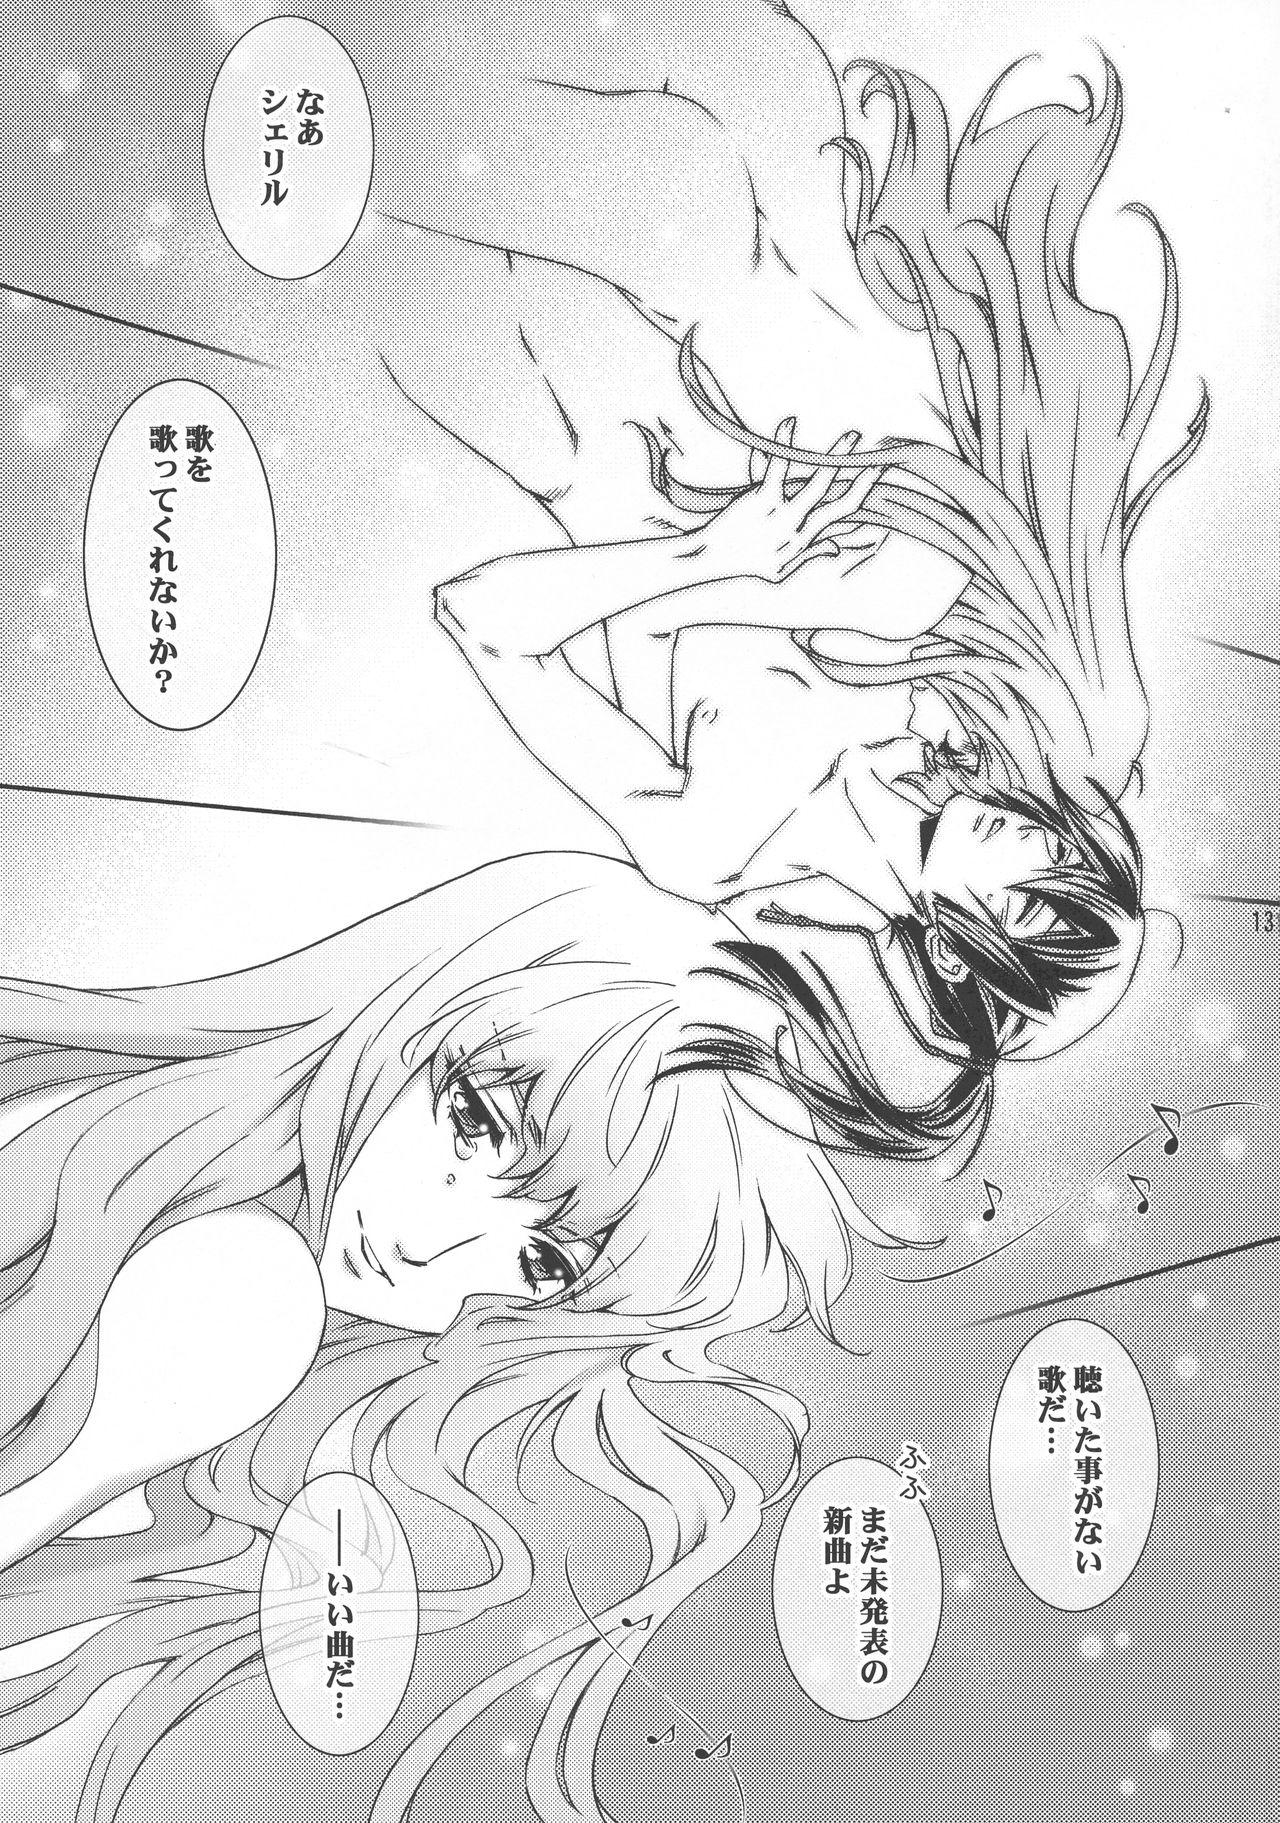 Butt Semplicita - Macross frontier Pounded - Page 12